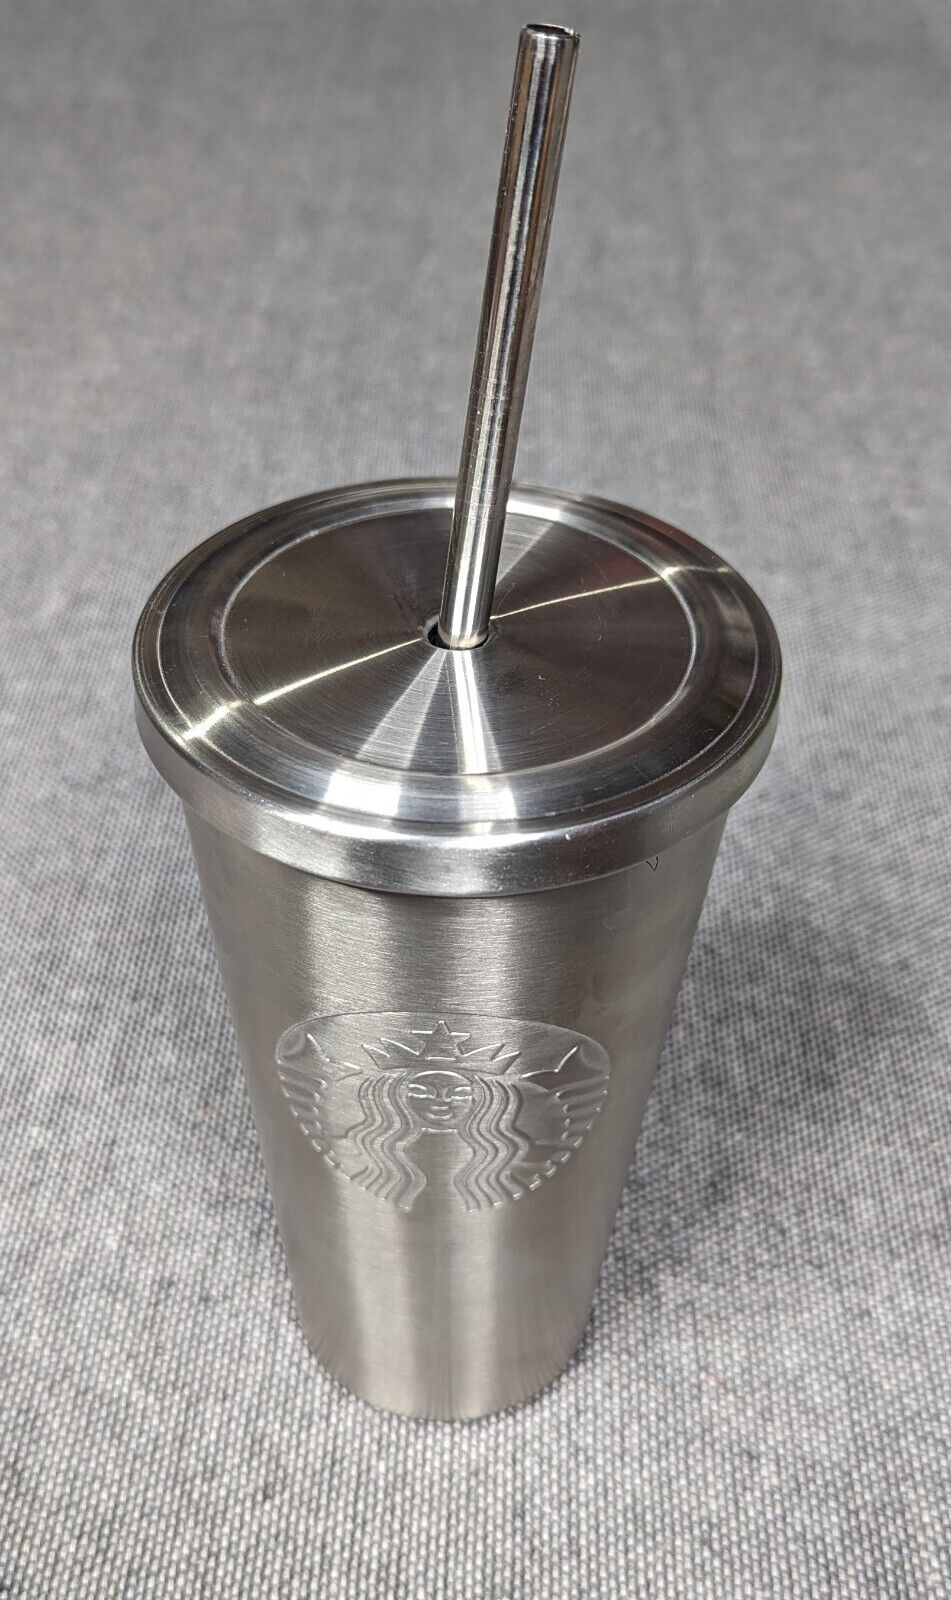 STARBUCKS 2014 SILVER Stainless Steel Cold Cup Mermaid Tumbler 16oz